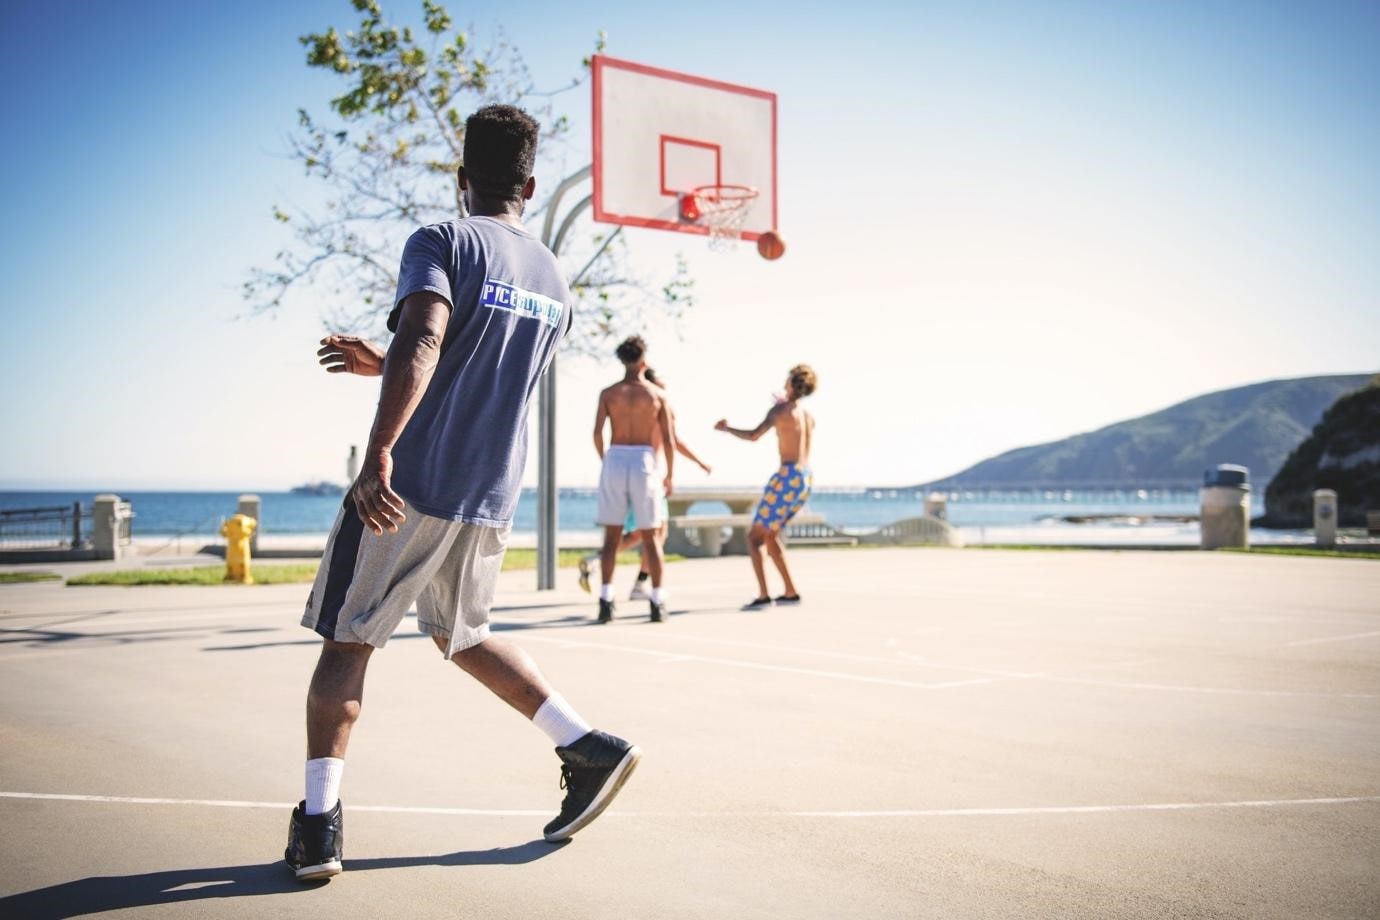 people playing basketball on an outdoor court